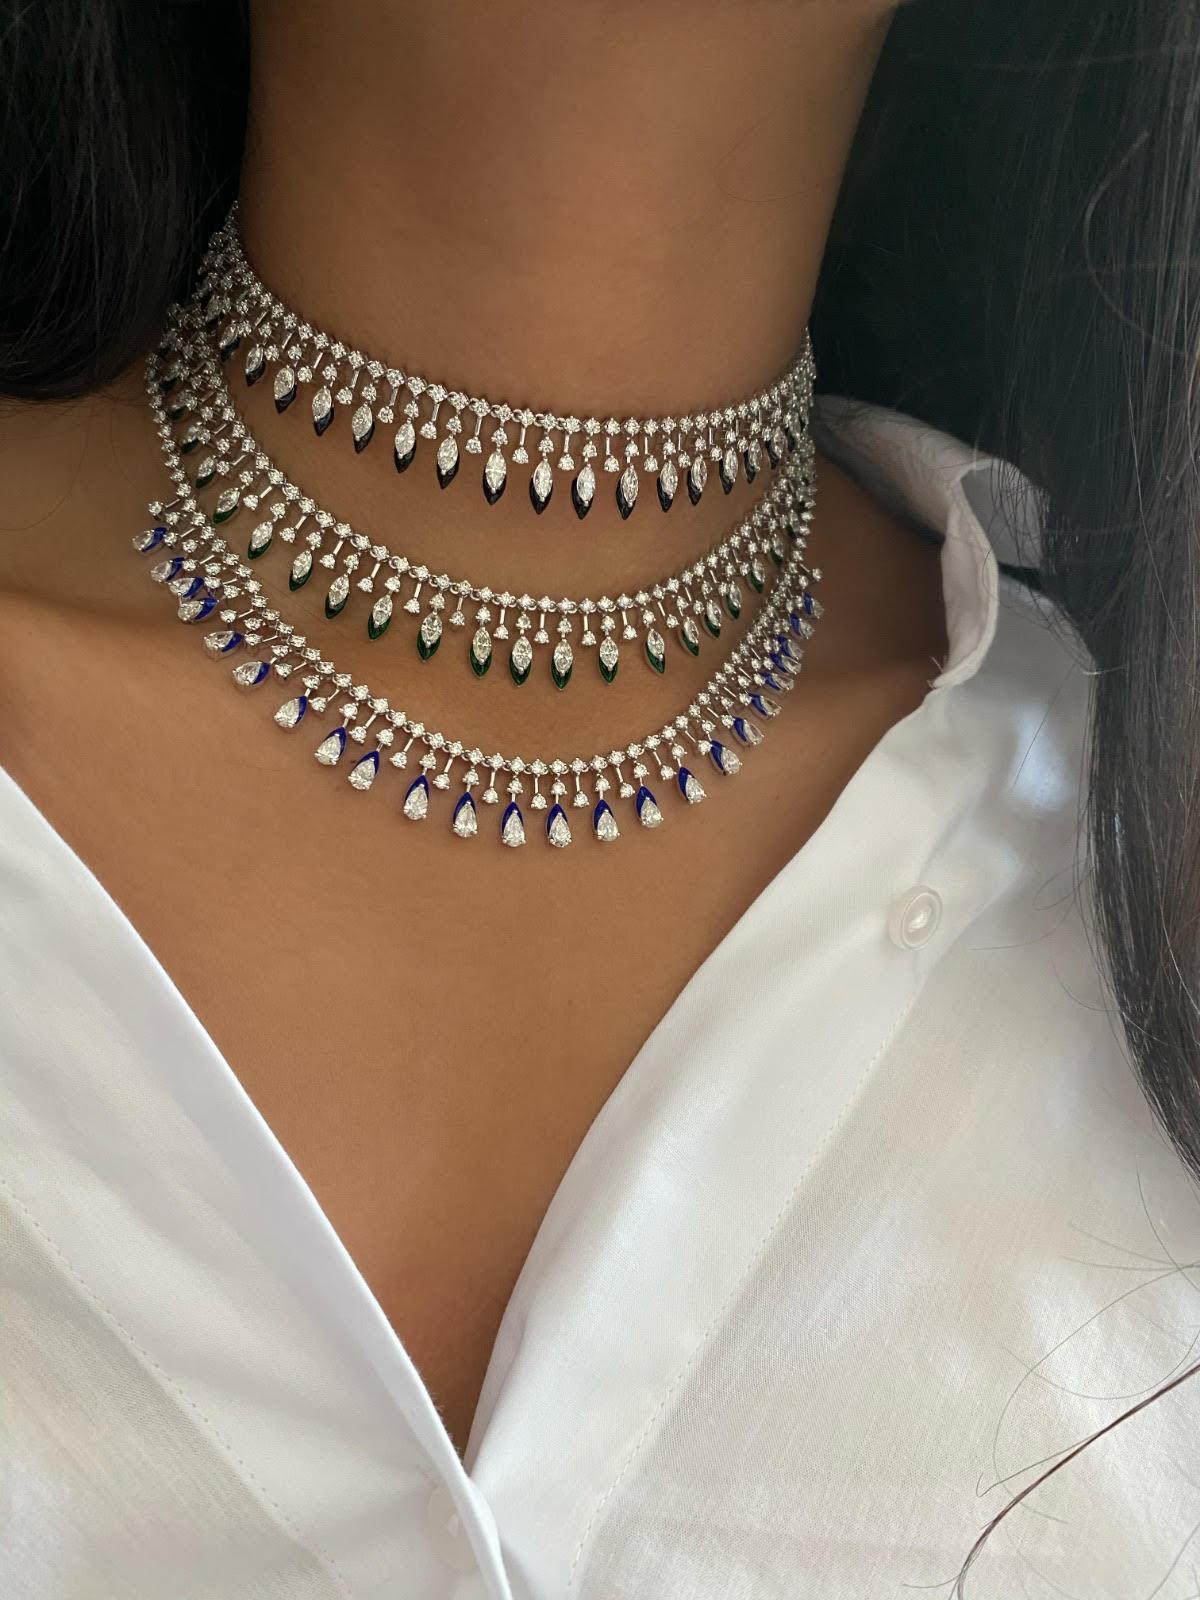 Graduating pear shape diamonds from 0.25 carats to 0.10 carats, in combination with 0.05 carat round diamonds. Navy Blue enamel is used to highlight the pear shapes. This choker is made in 18k white gold, and has a self adjustable ball chain